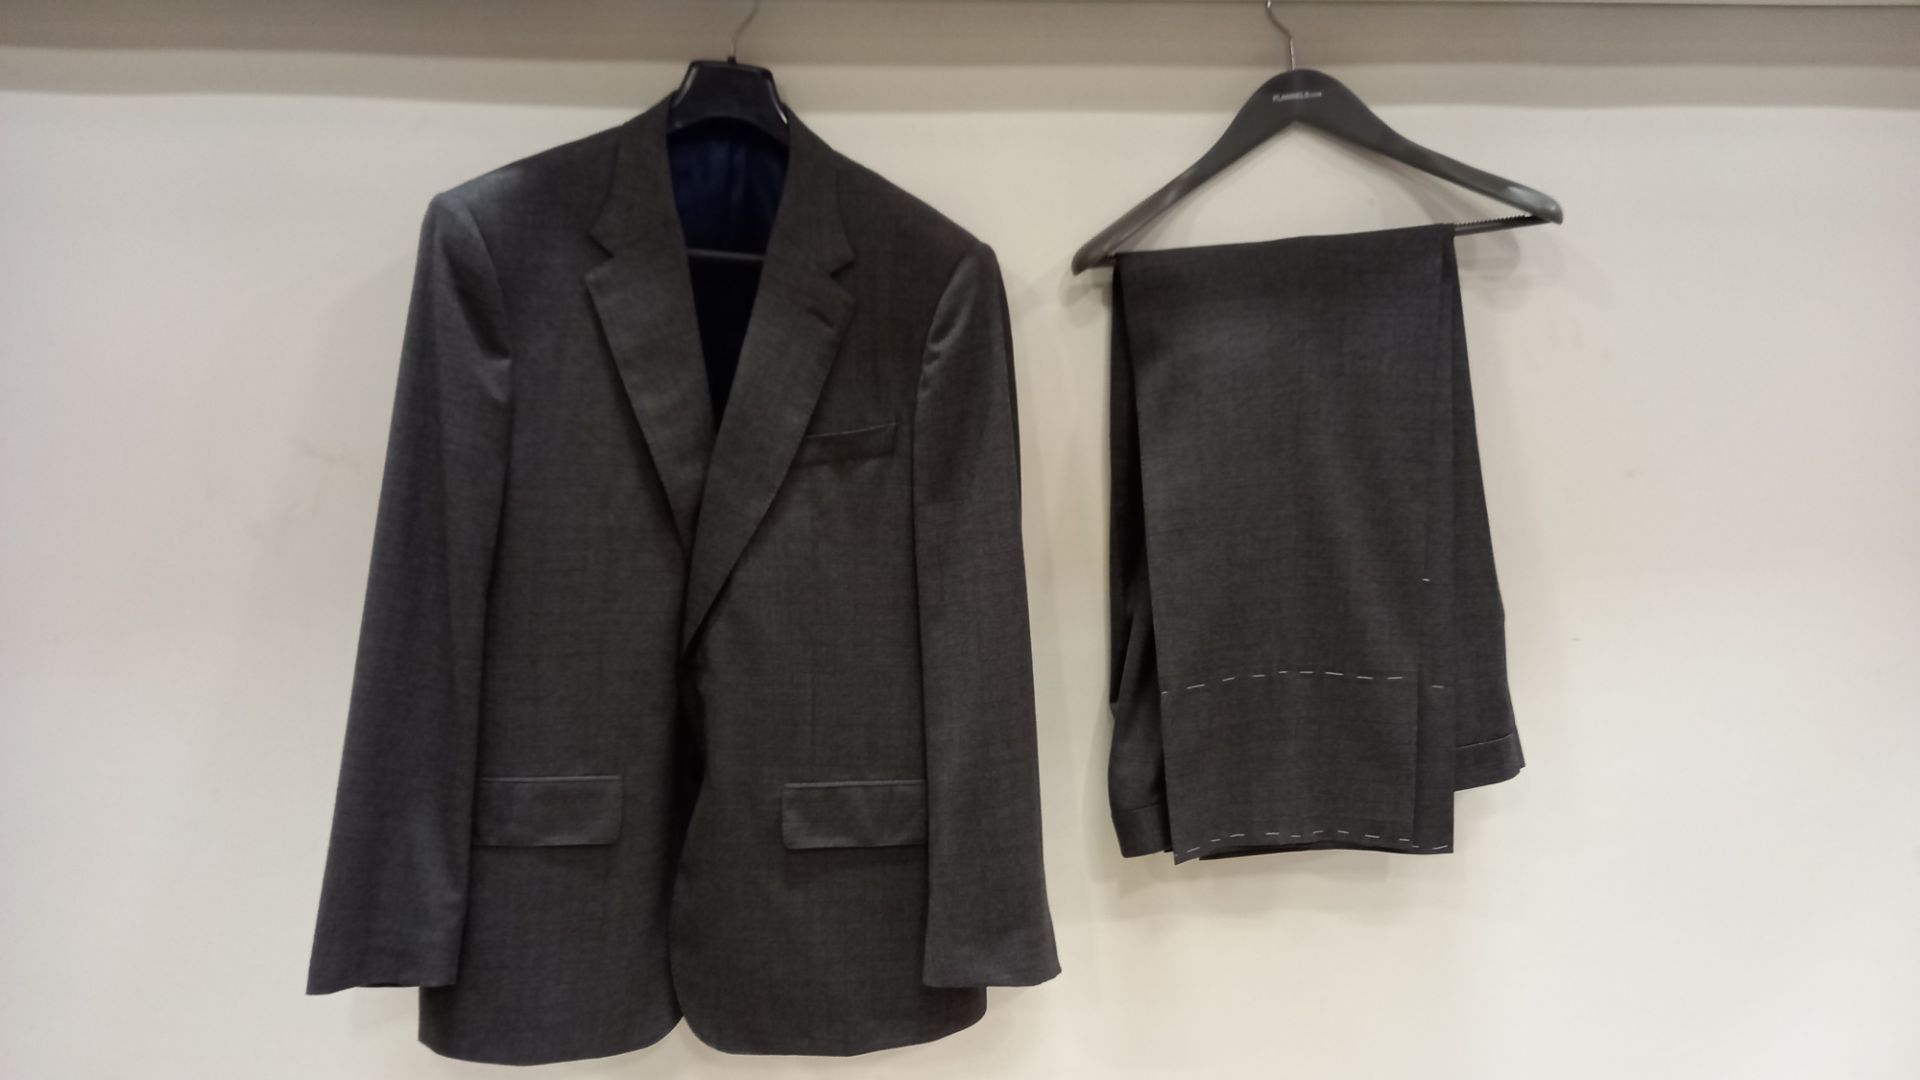 3 X BRAND NEW LUTWYCHE HAND TAILORED DARK GREY PATTERNED SUITS SIZE 40R, 44R AND 46R (PLEASE NOTE